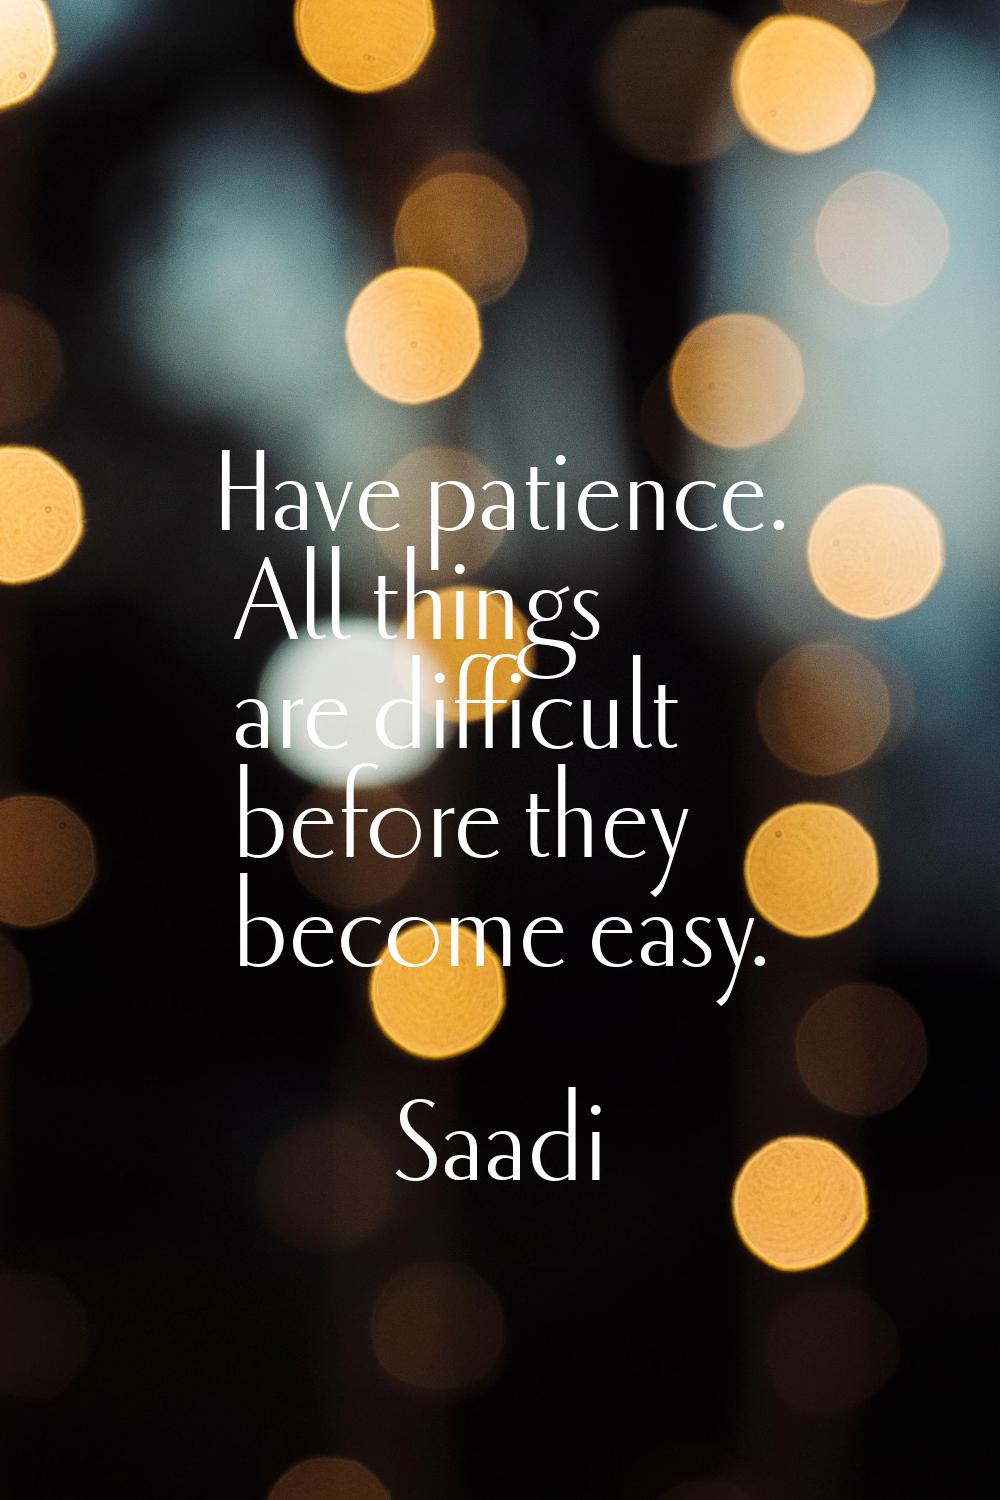 Have patience. All things are difficult before they become easy.